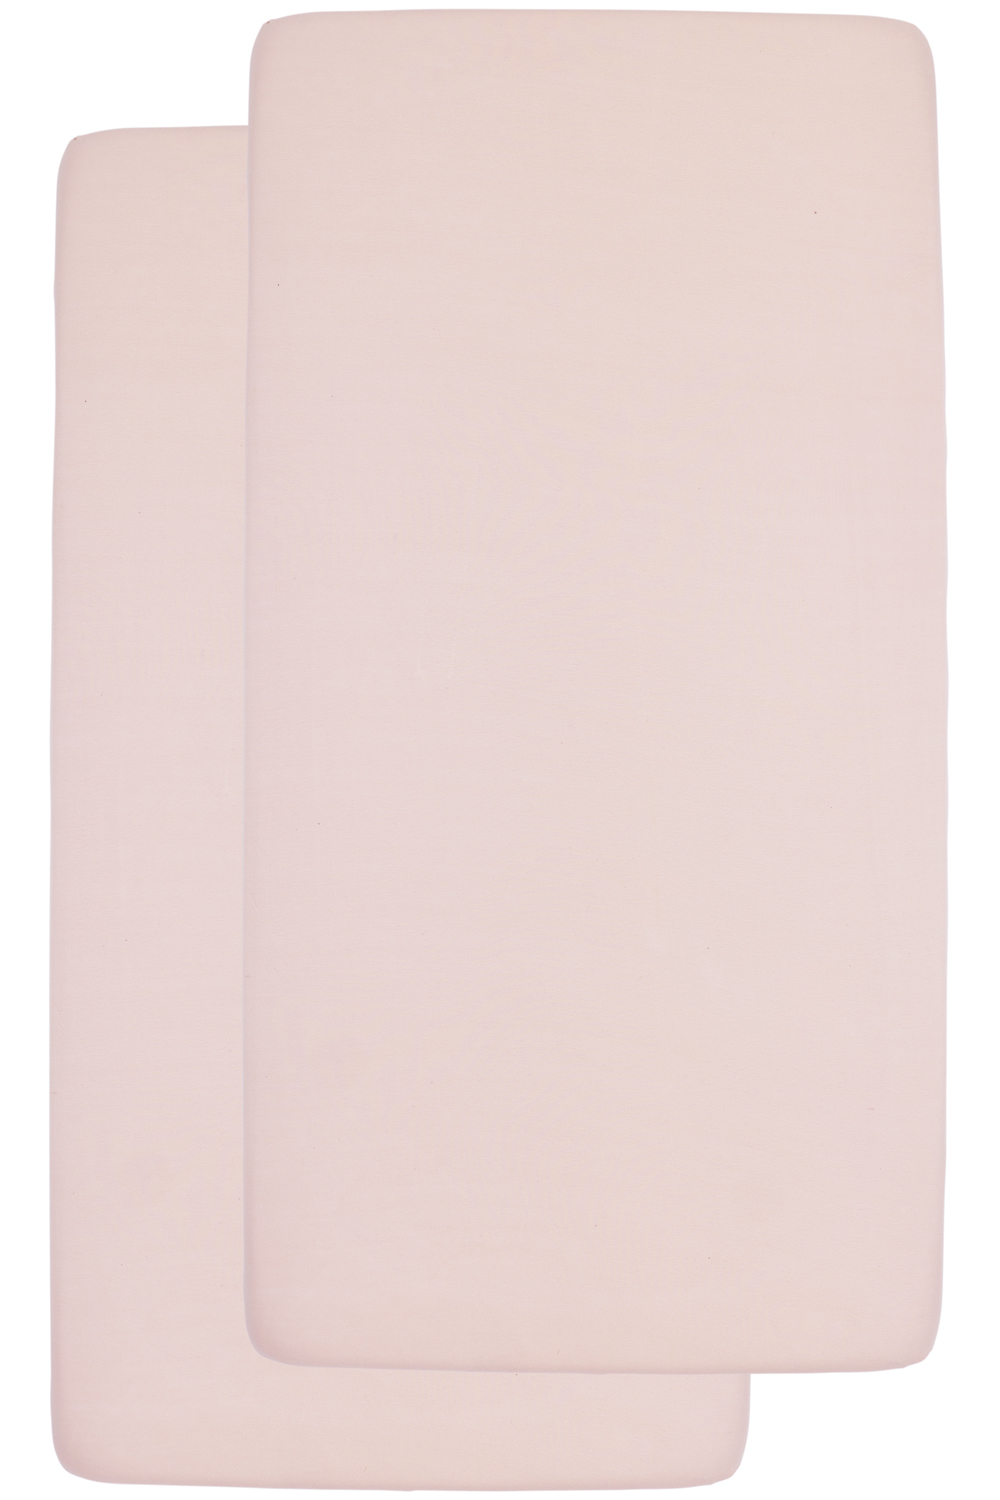 Fitted sheet crib 2-pack Uni - soft pink - 40x80/90cm